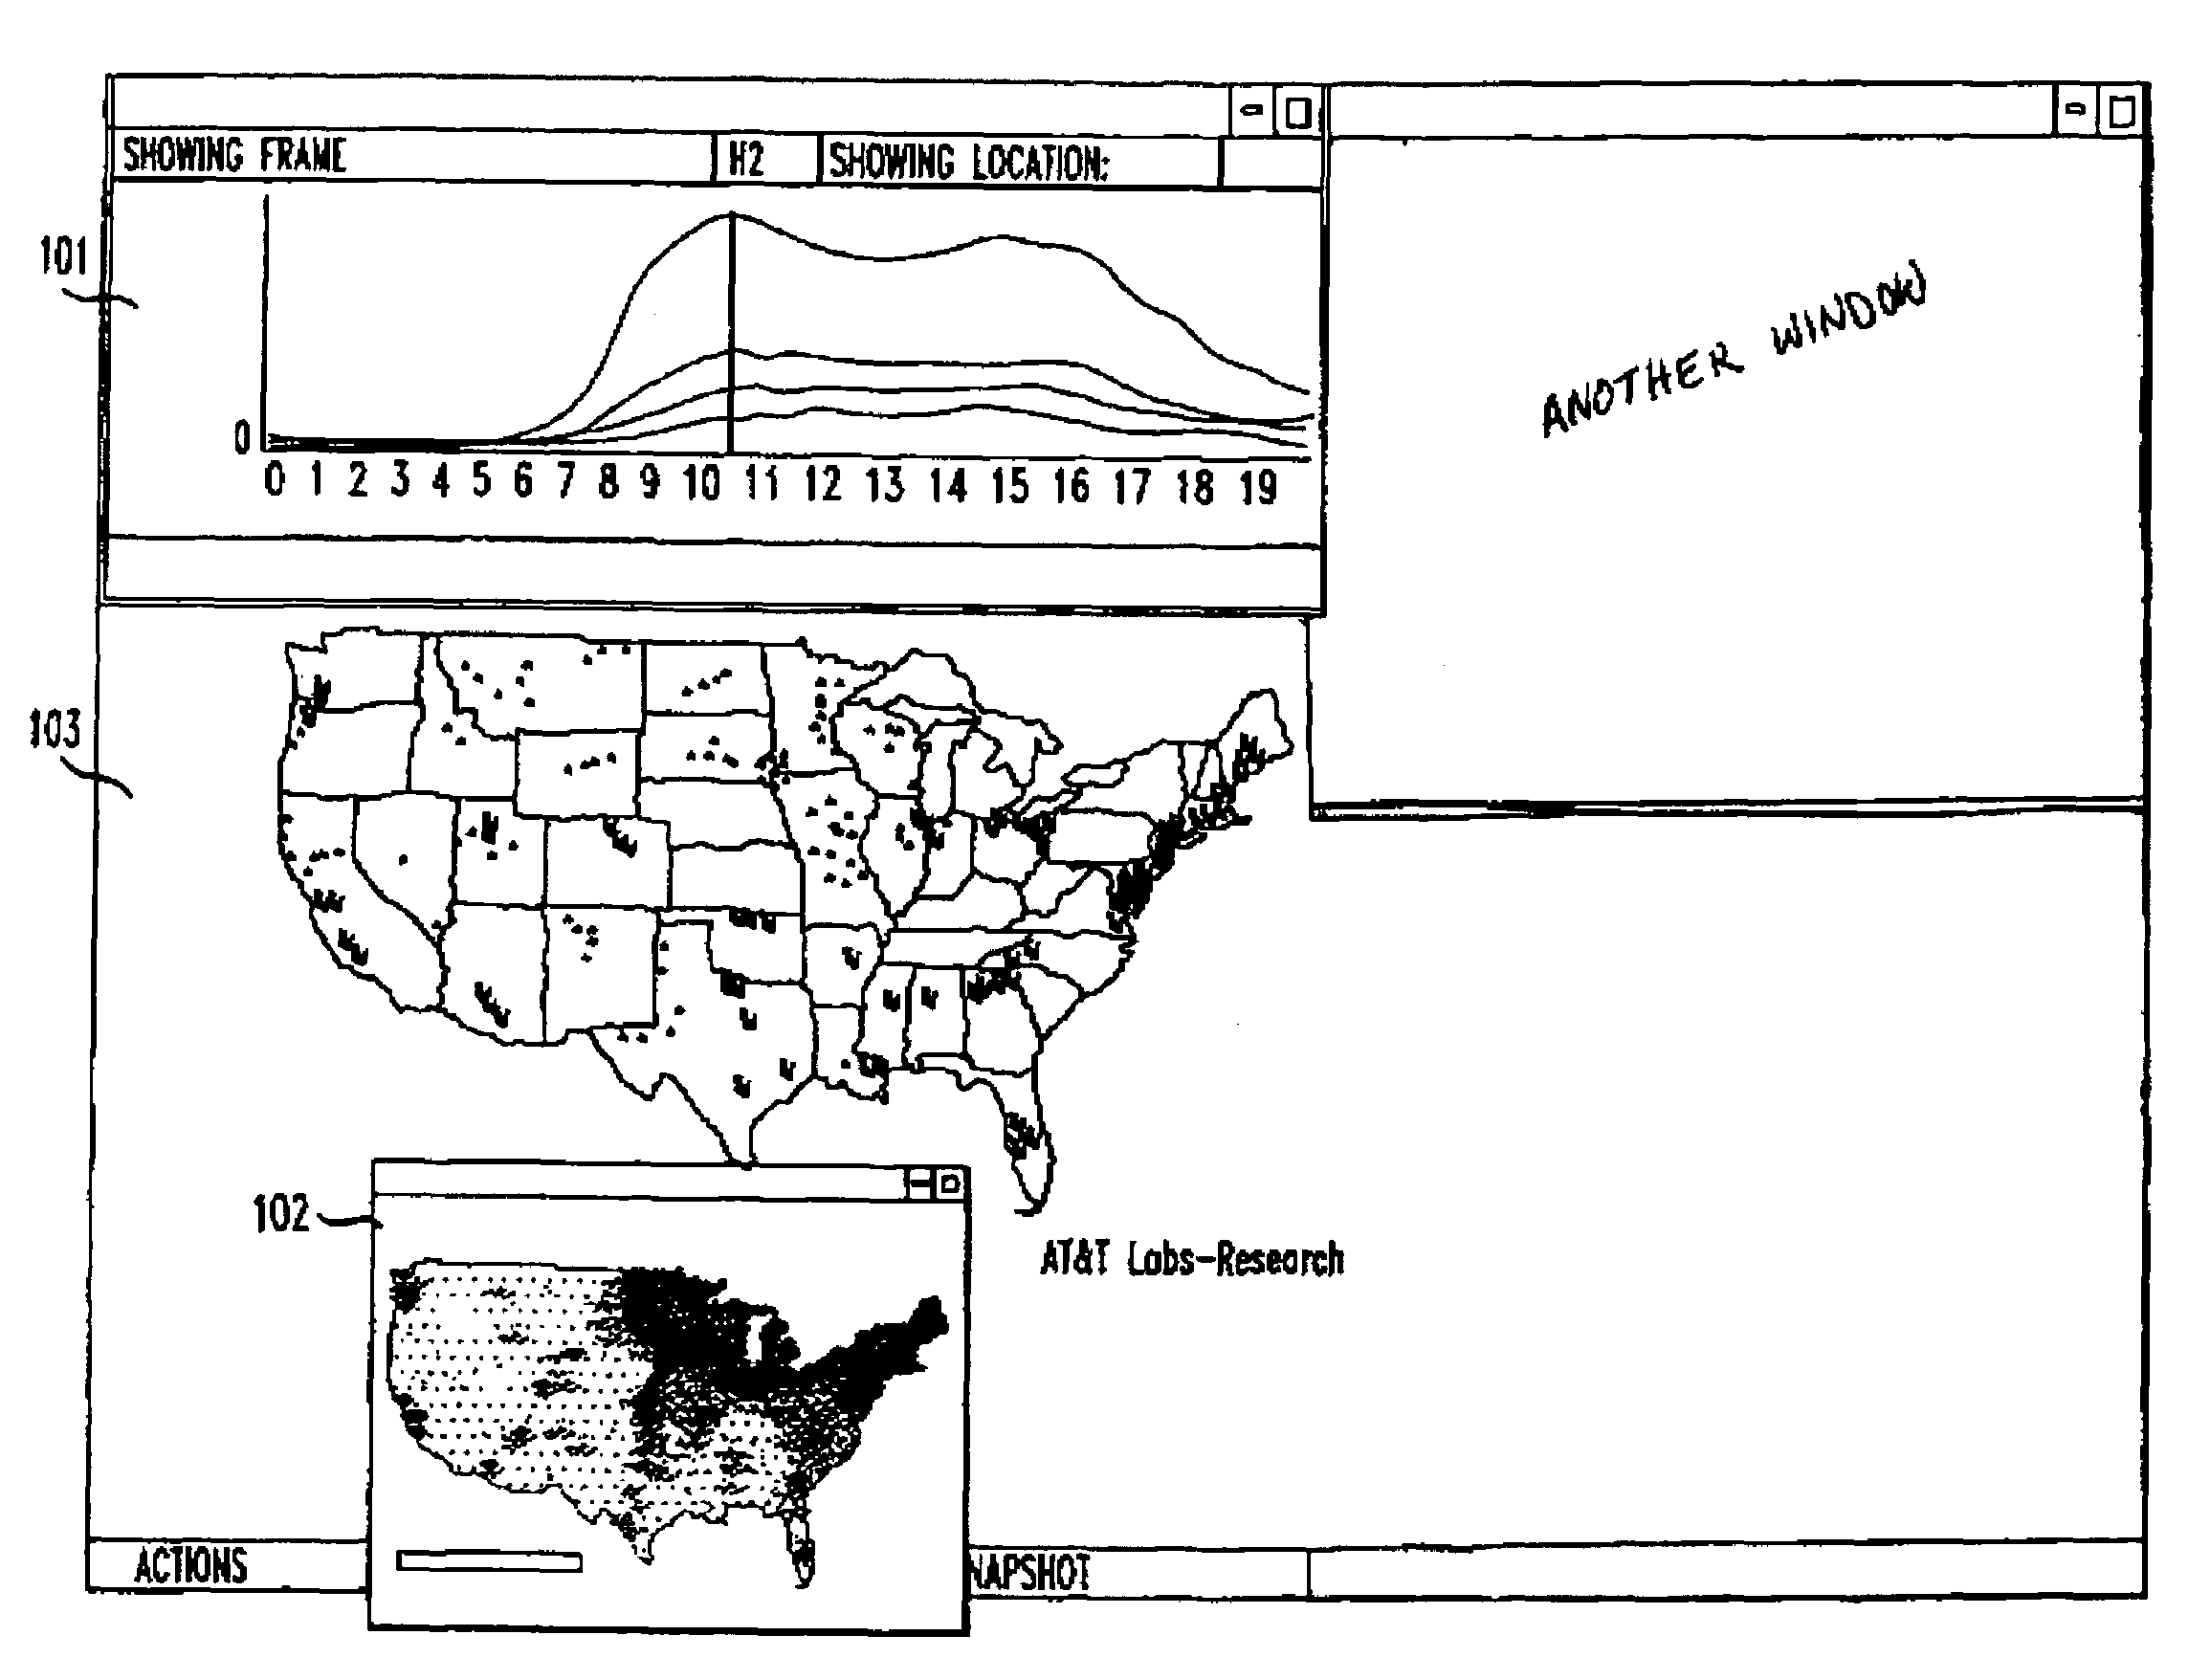 System and method for large-scale data visualization